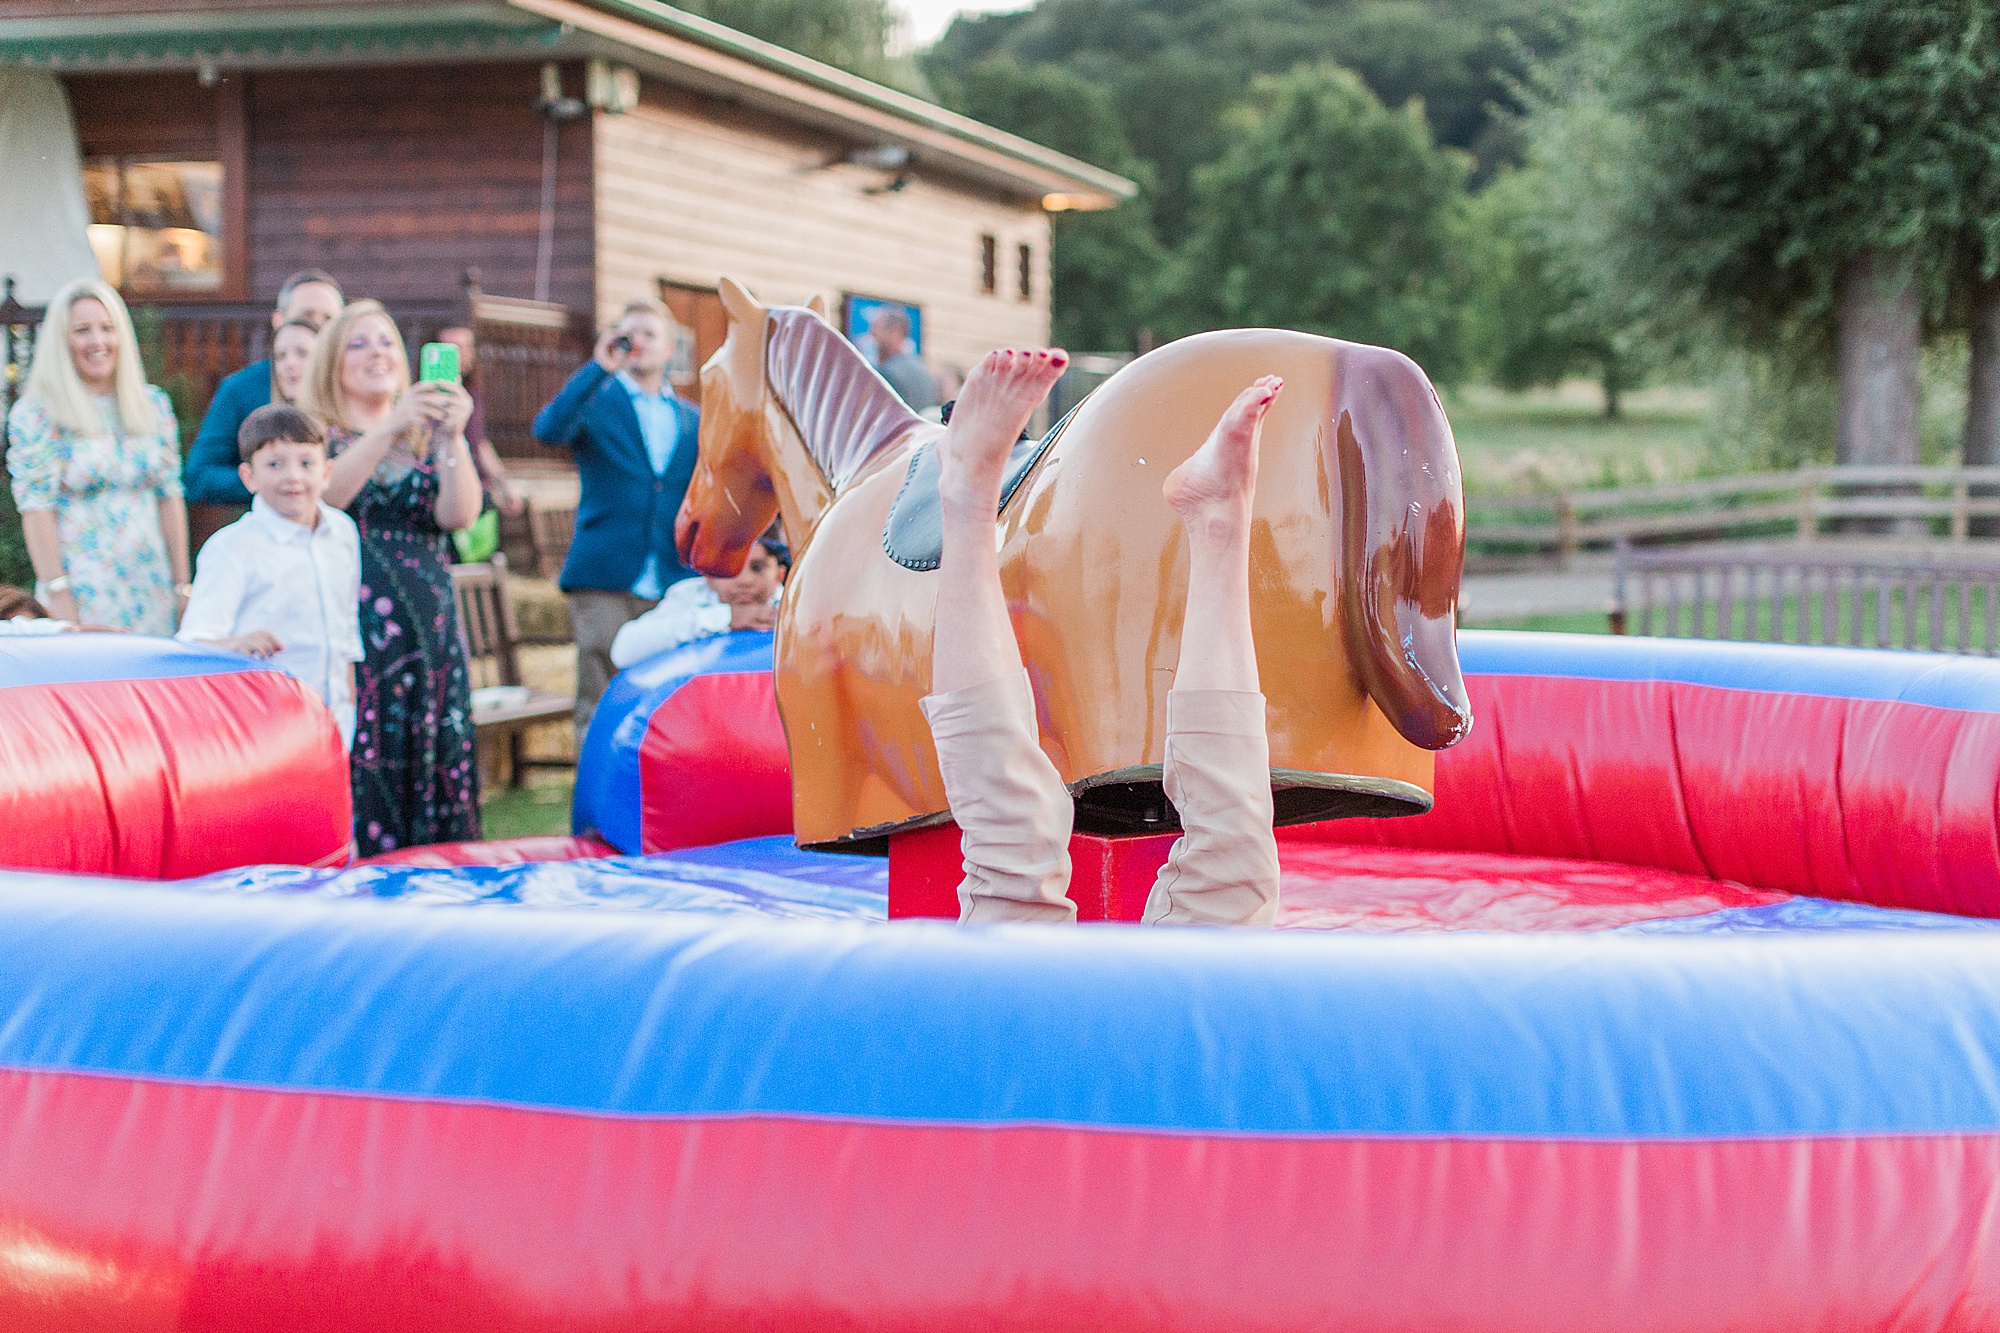 photo of a wedding guest riding a mechanical rodeo pony outside at a wedding reception with guests watching, the person has fallen off the pony and landed with their feet in the air